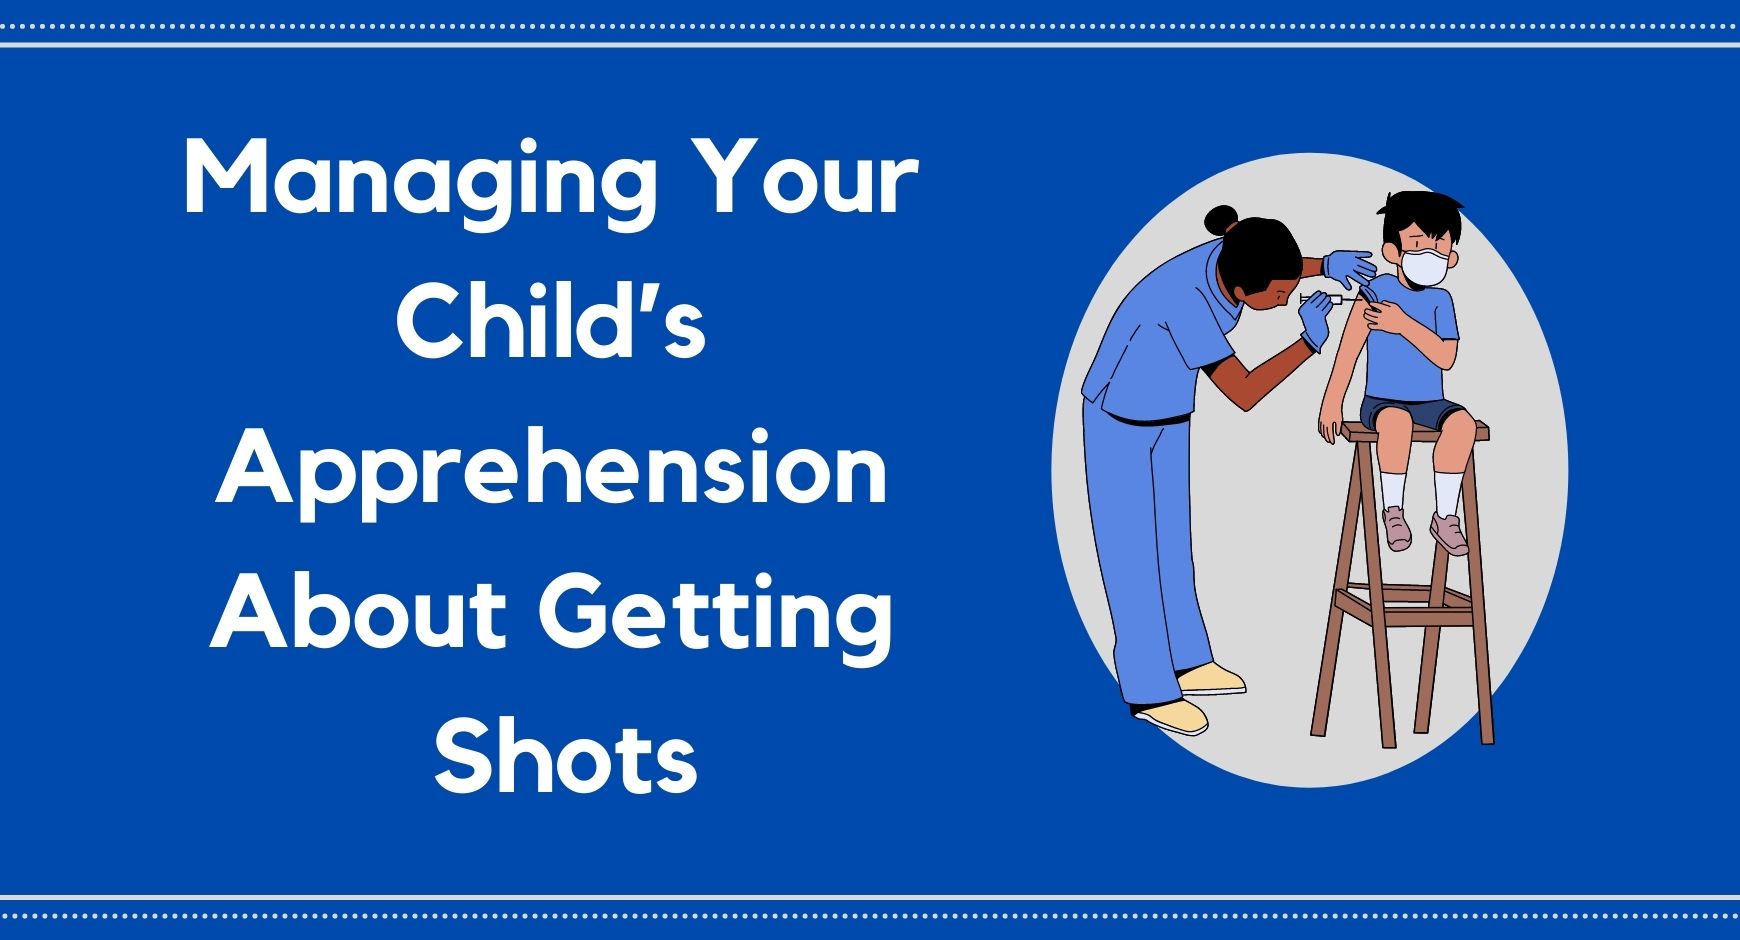 A young boy looking worried as a nurse gives him a shot next to words that read "Managing Your Child’s Apprehension About Getting Shots"